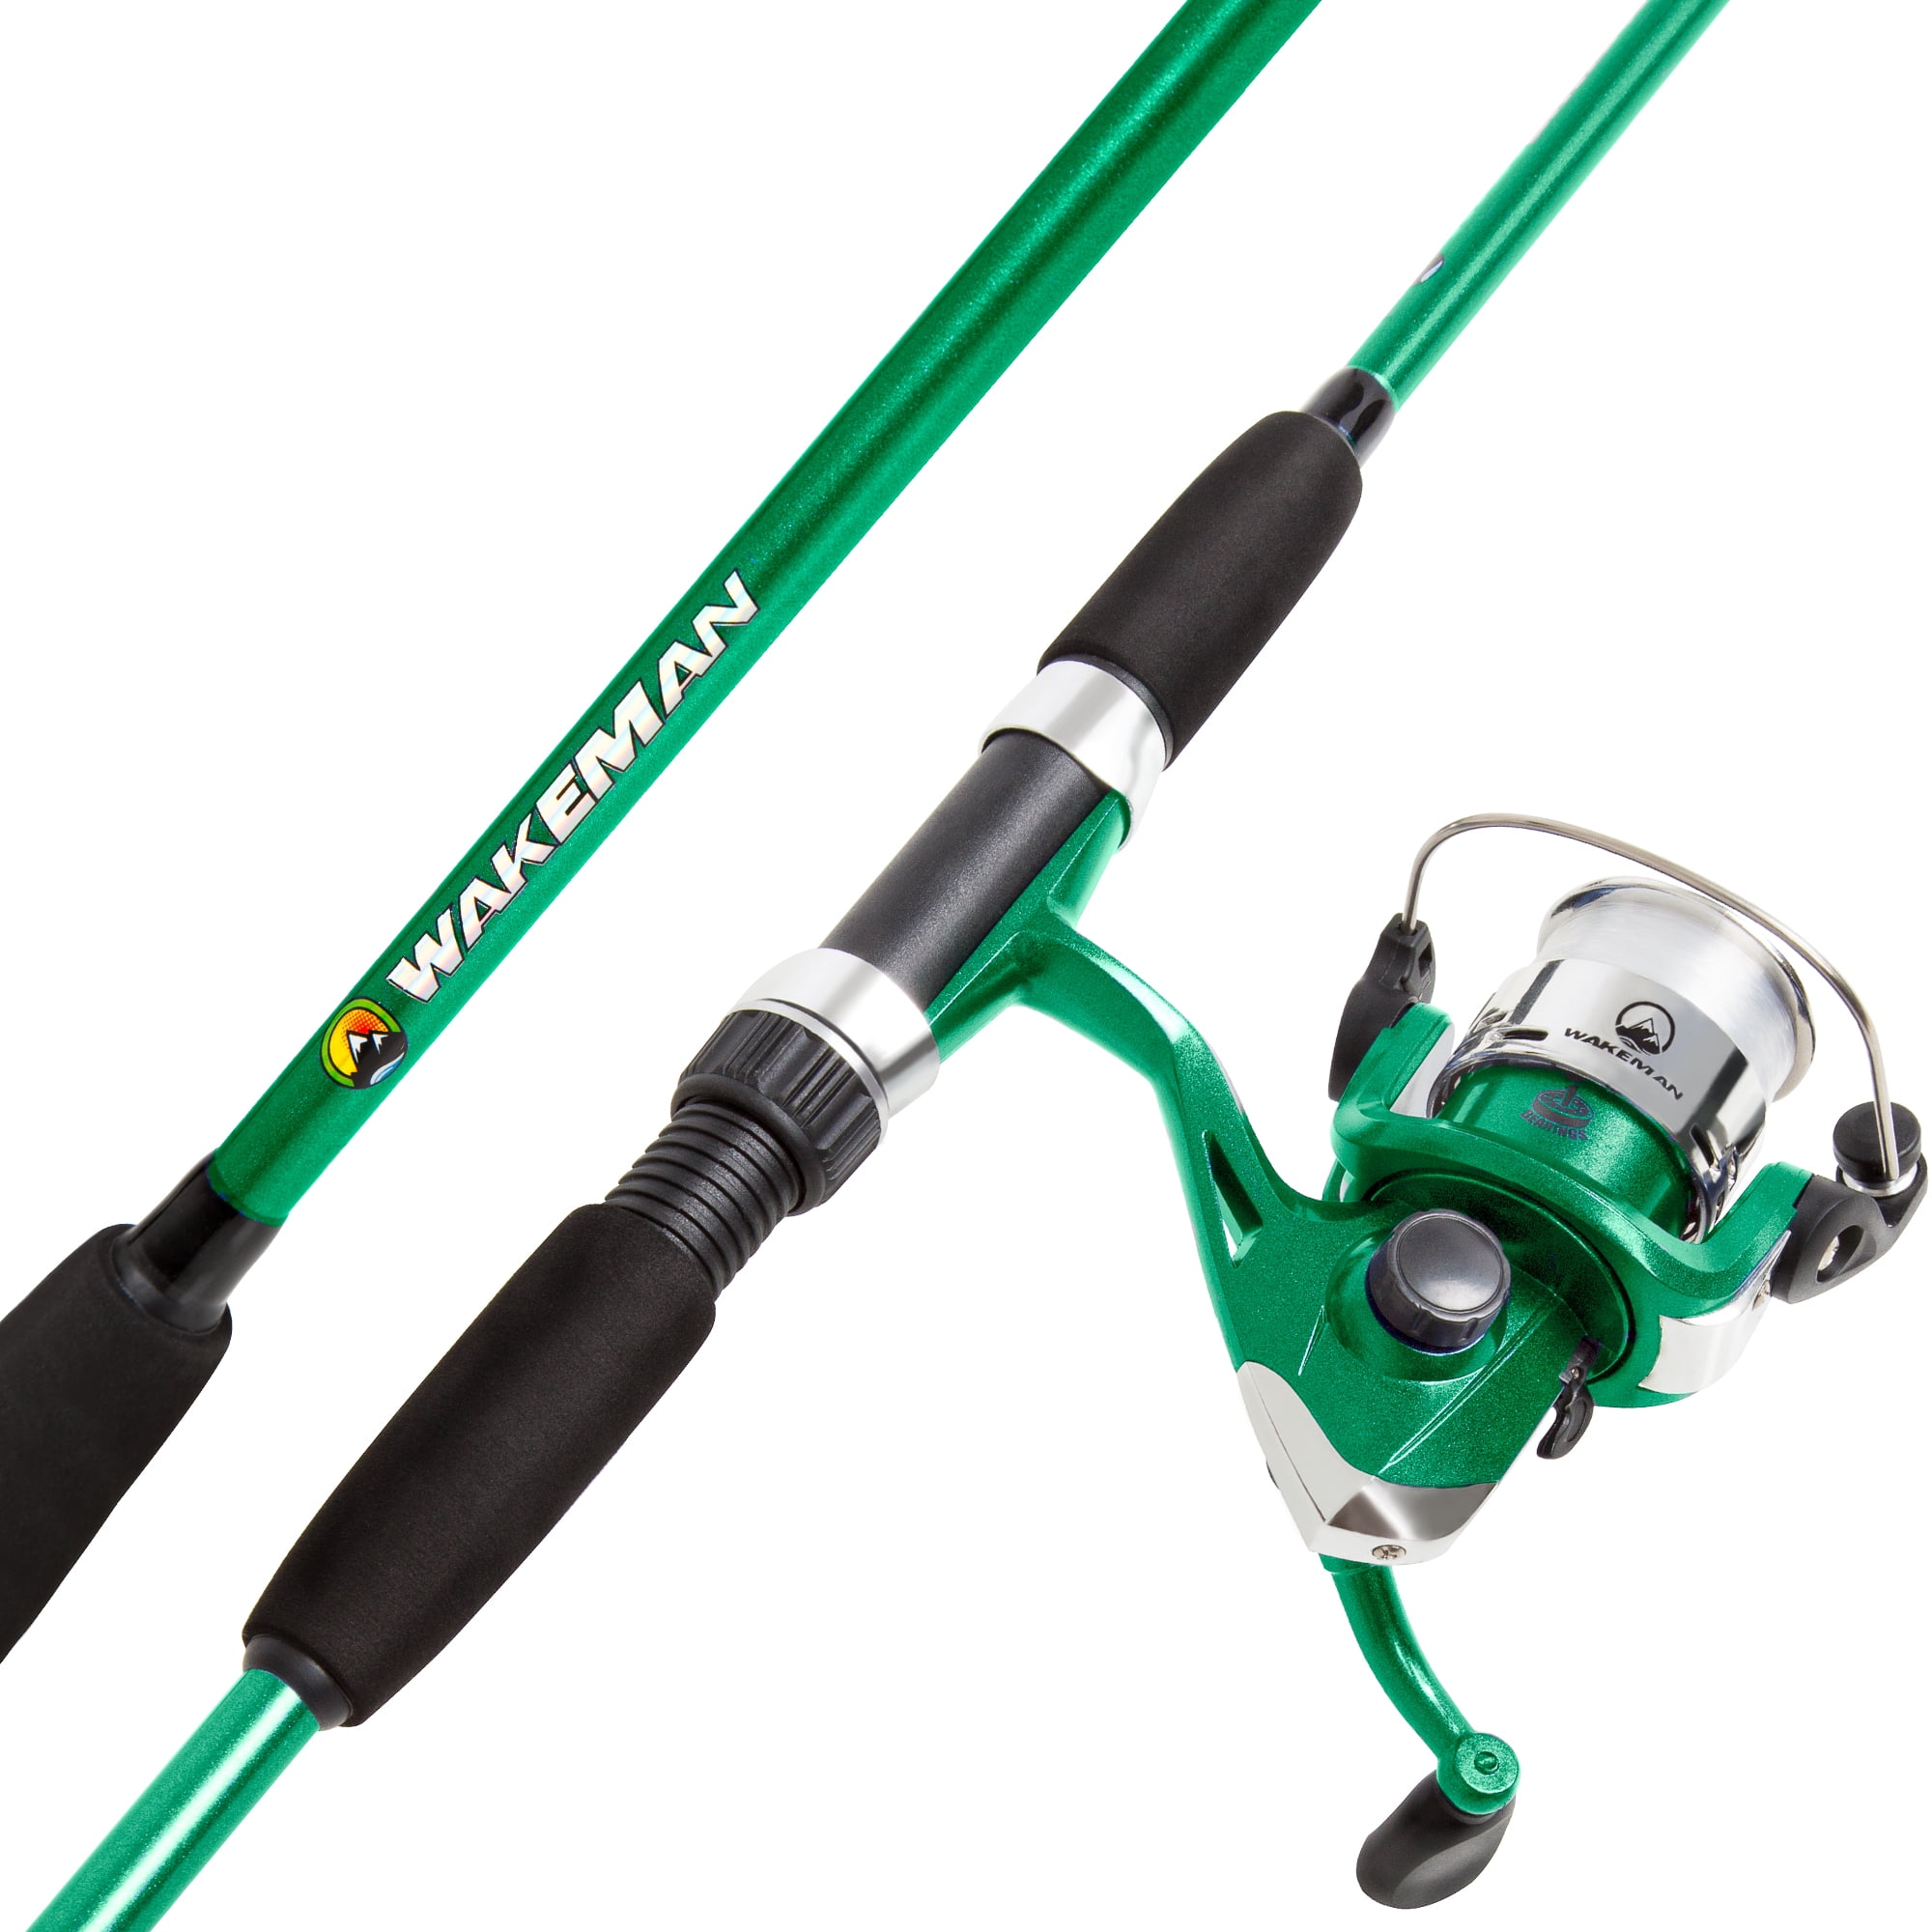 Wakeman Swarm Series Spinning Rod and Reel Combo 